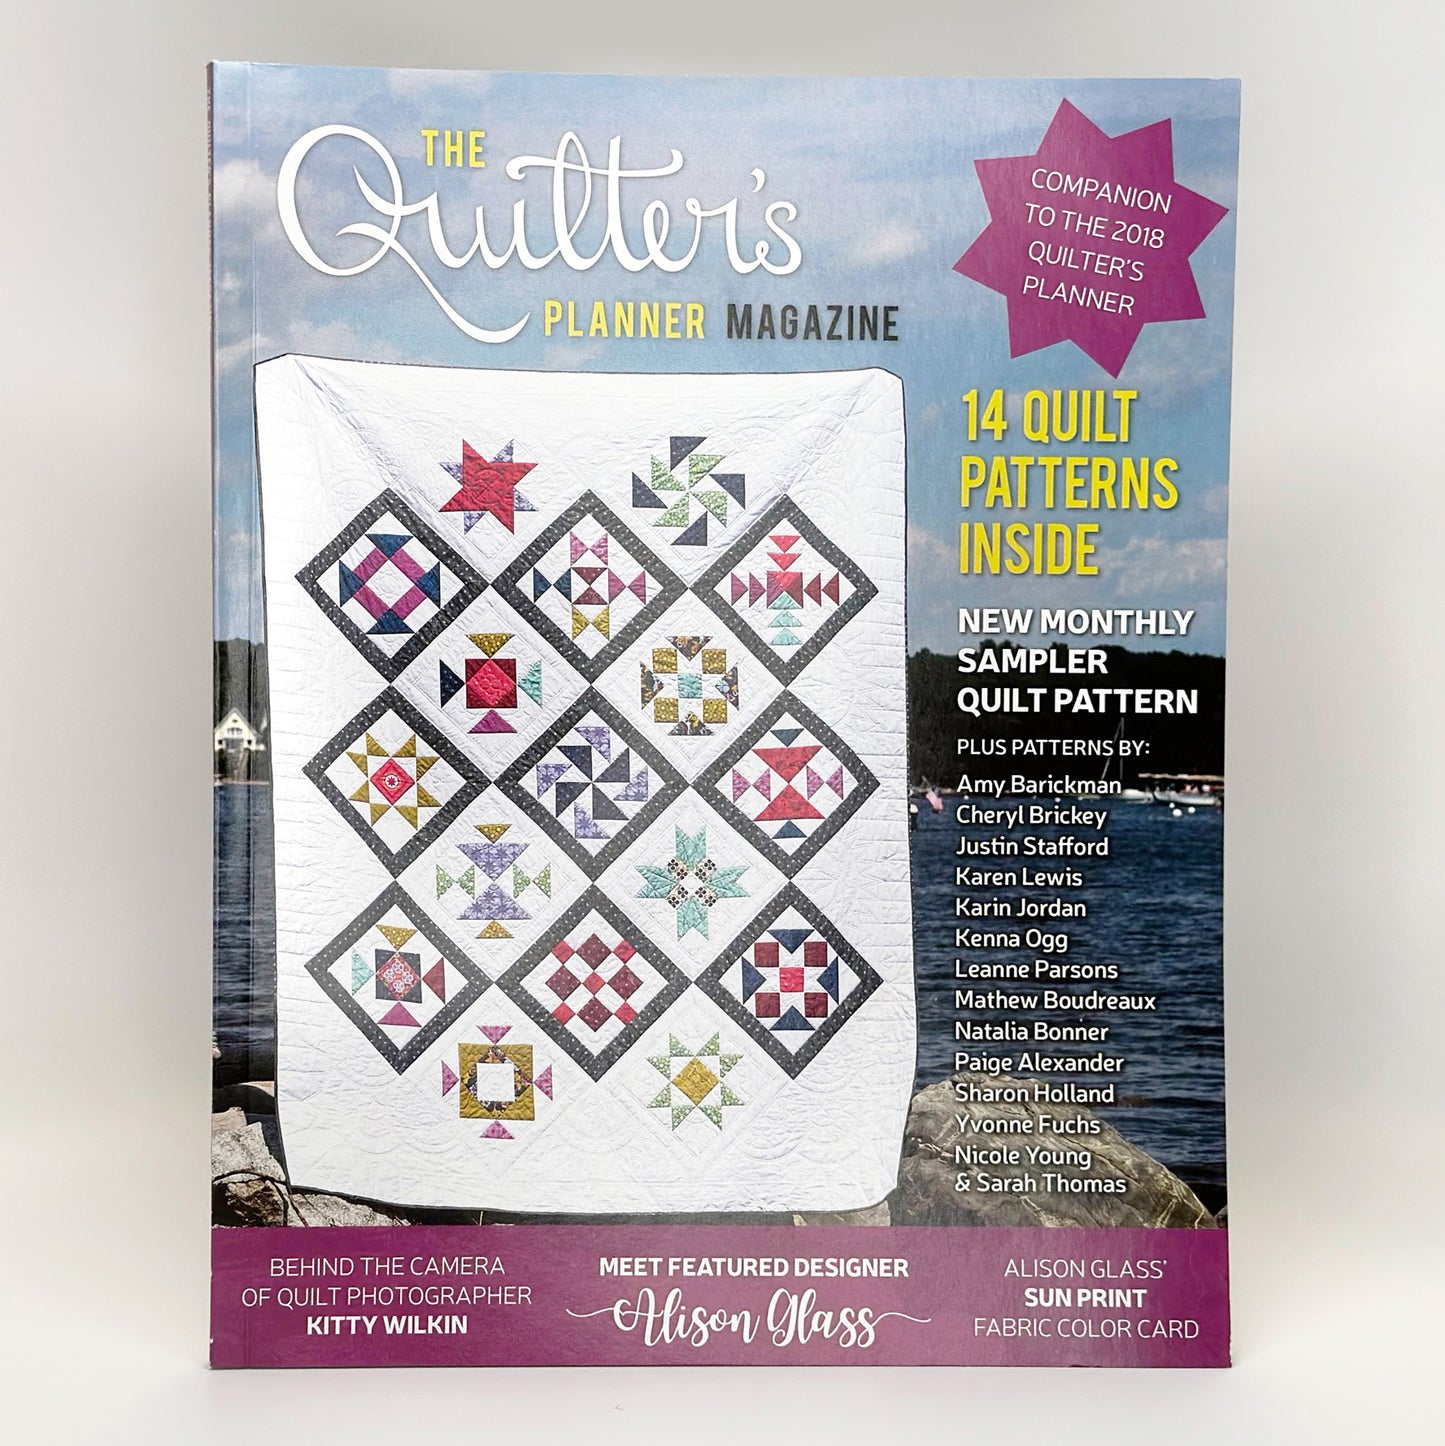 2018 Quilter's Planner Magazine: 13 sewing patterns inside